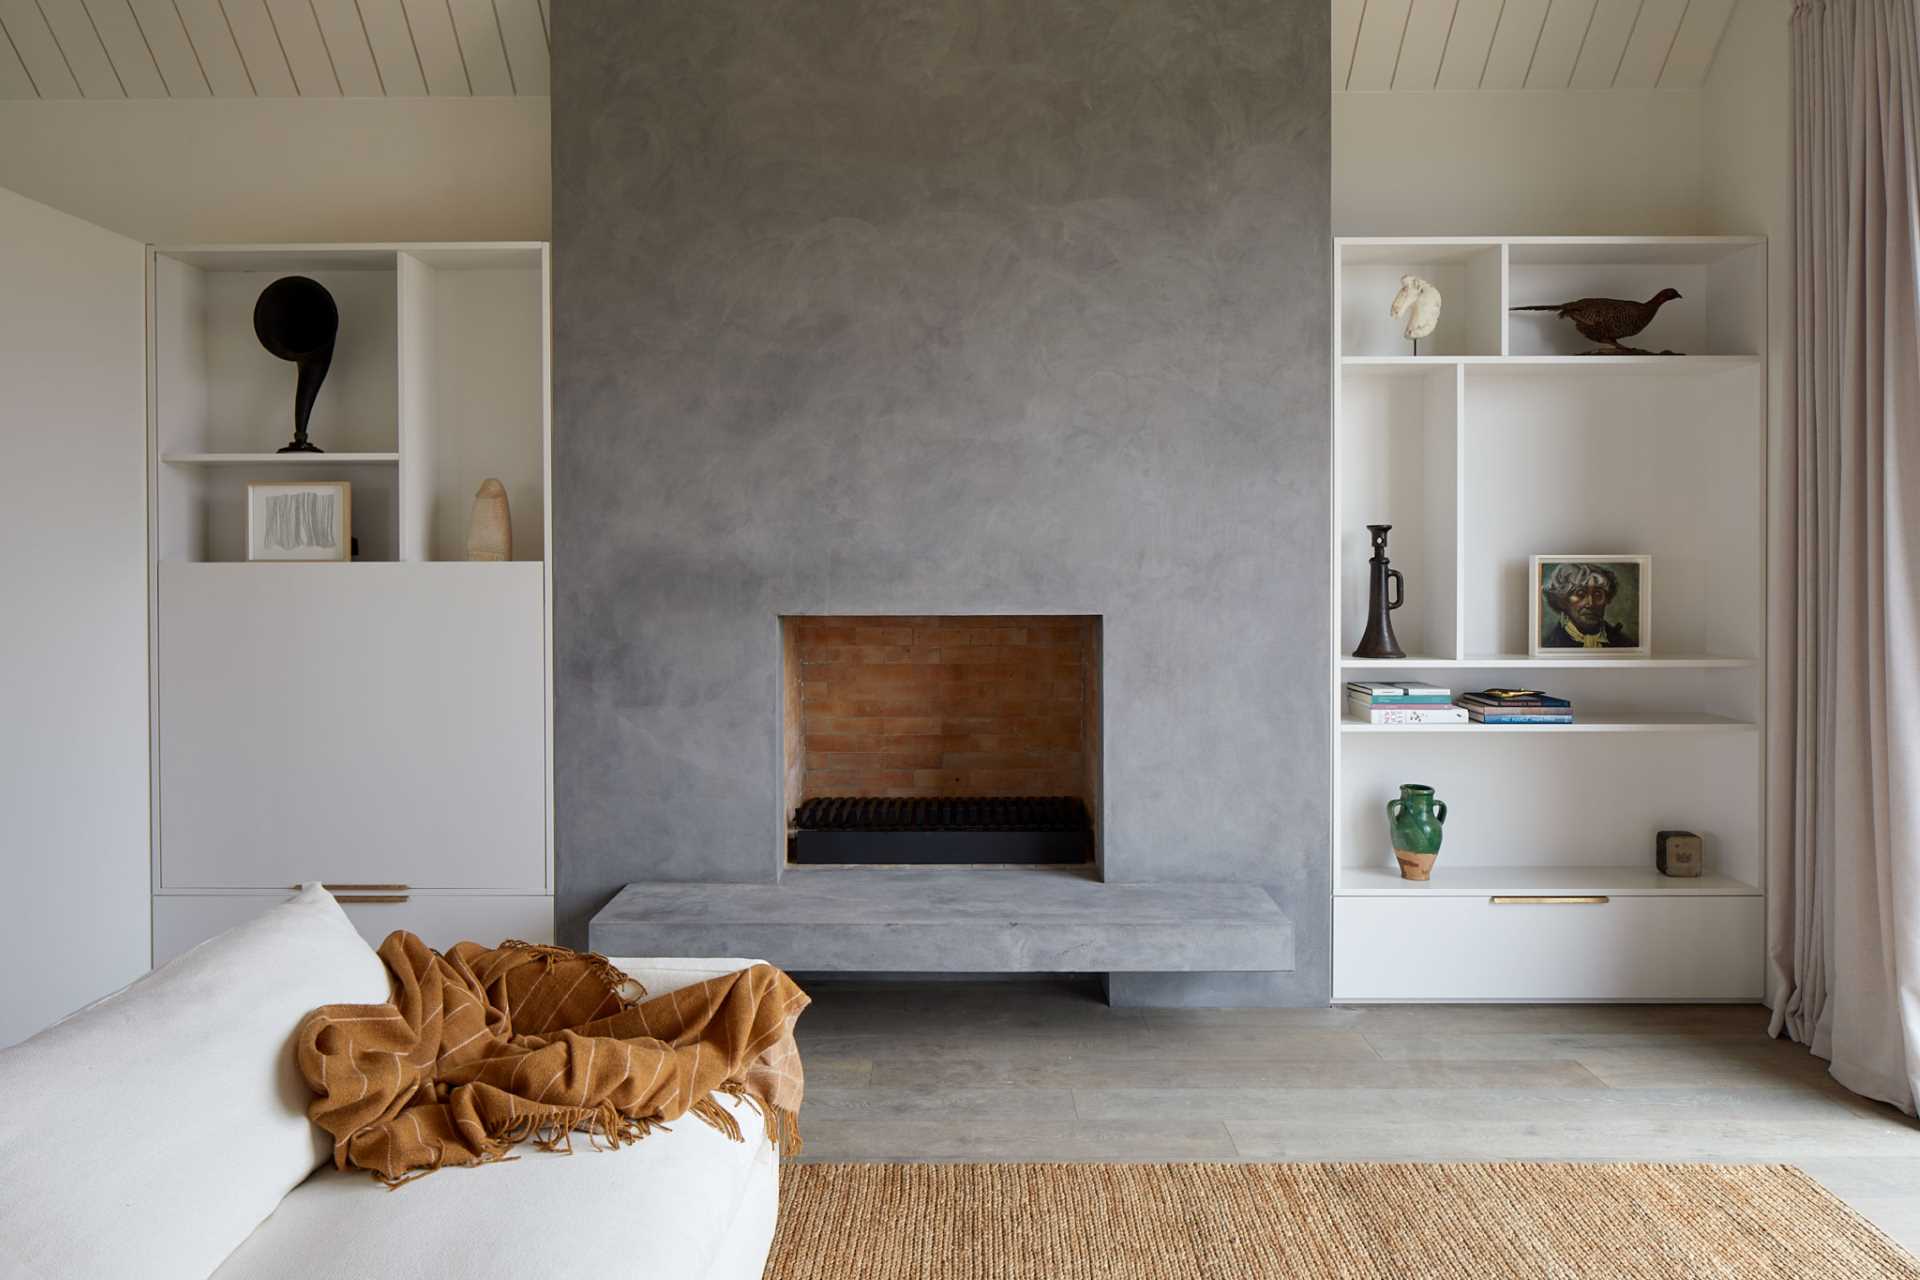 A modern living room with built-in shelving and cabinets that flank either side of the fireplace.